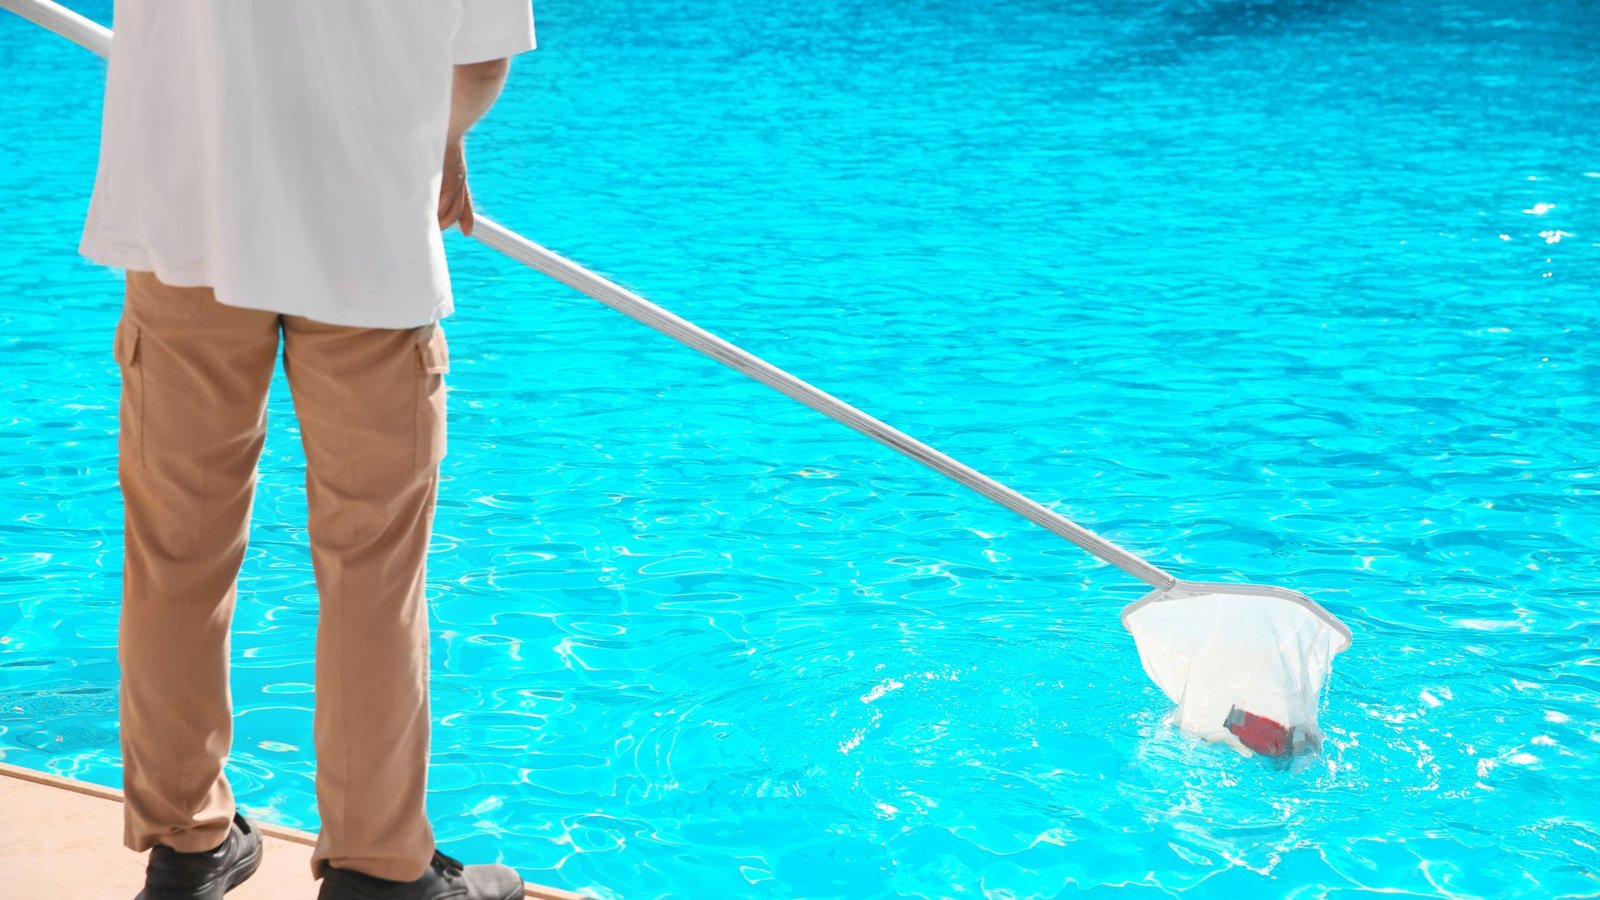 What Causes Cloudy Pool Water? How Do You Fix It?